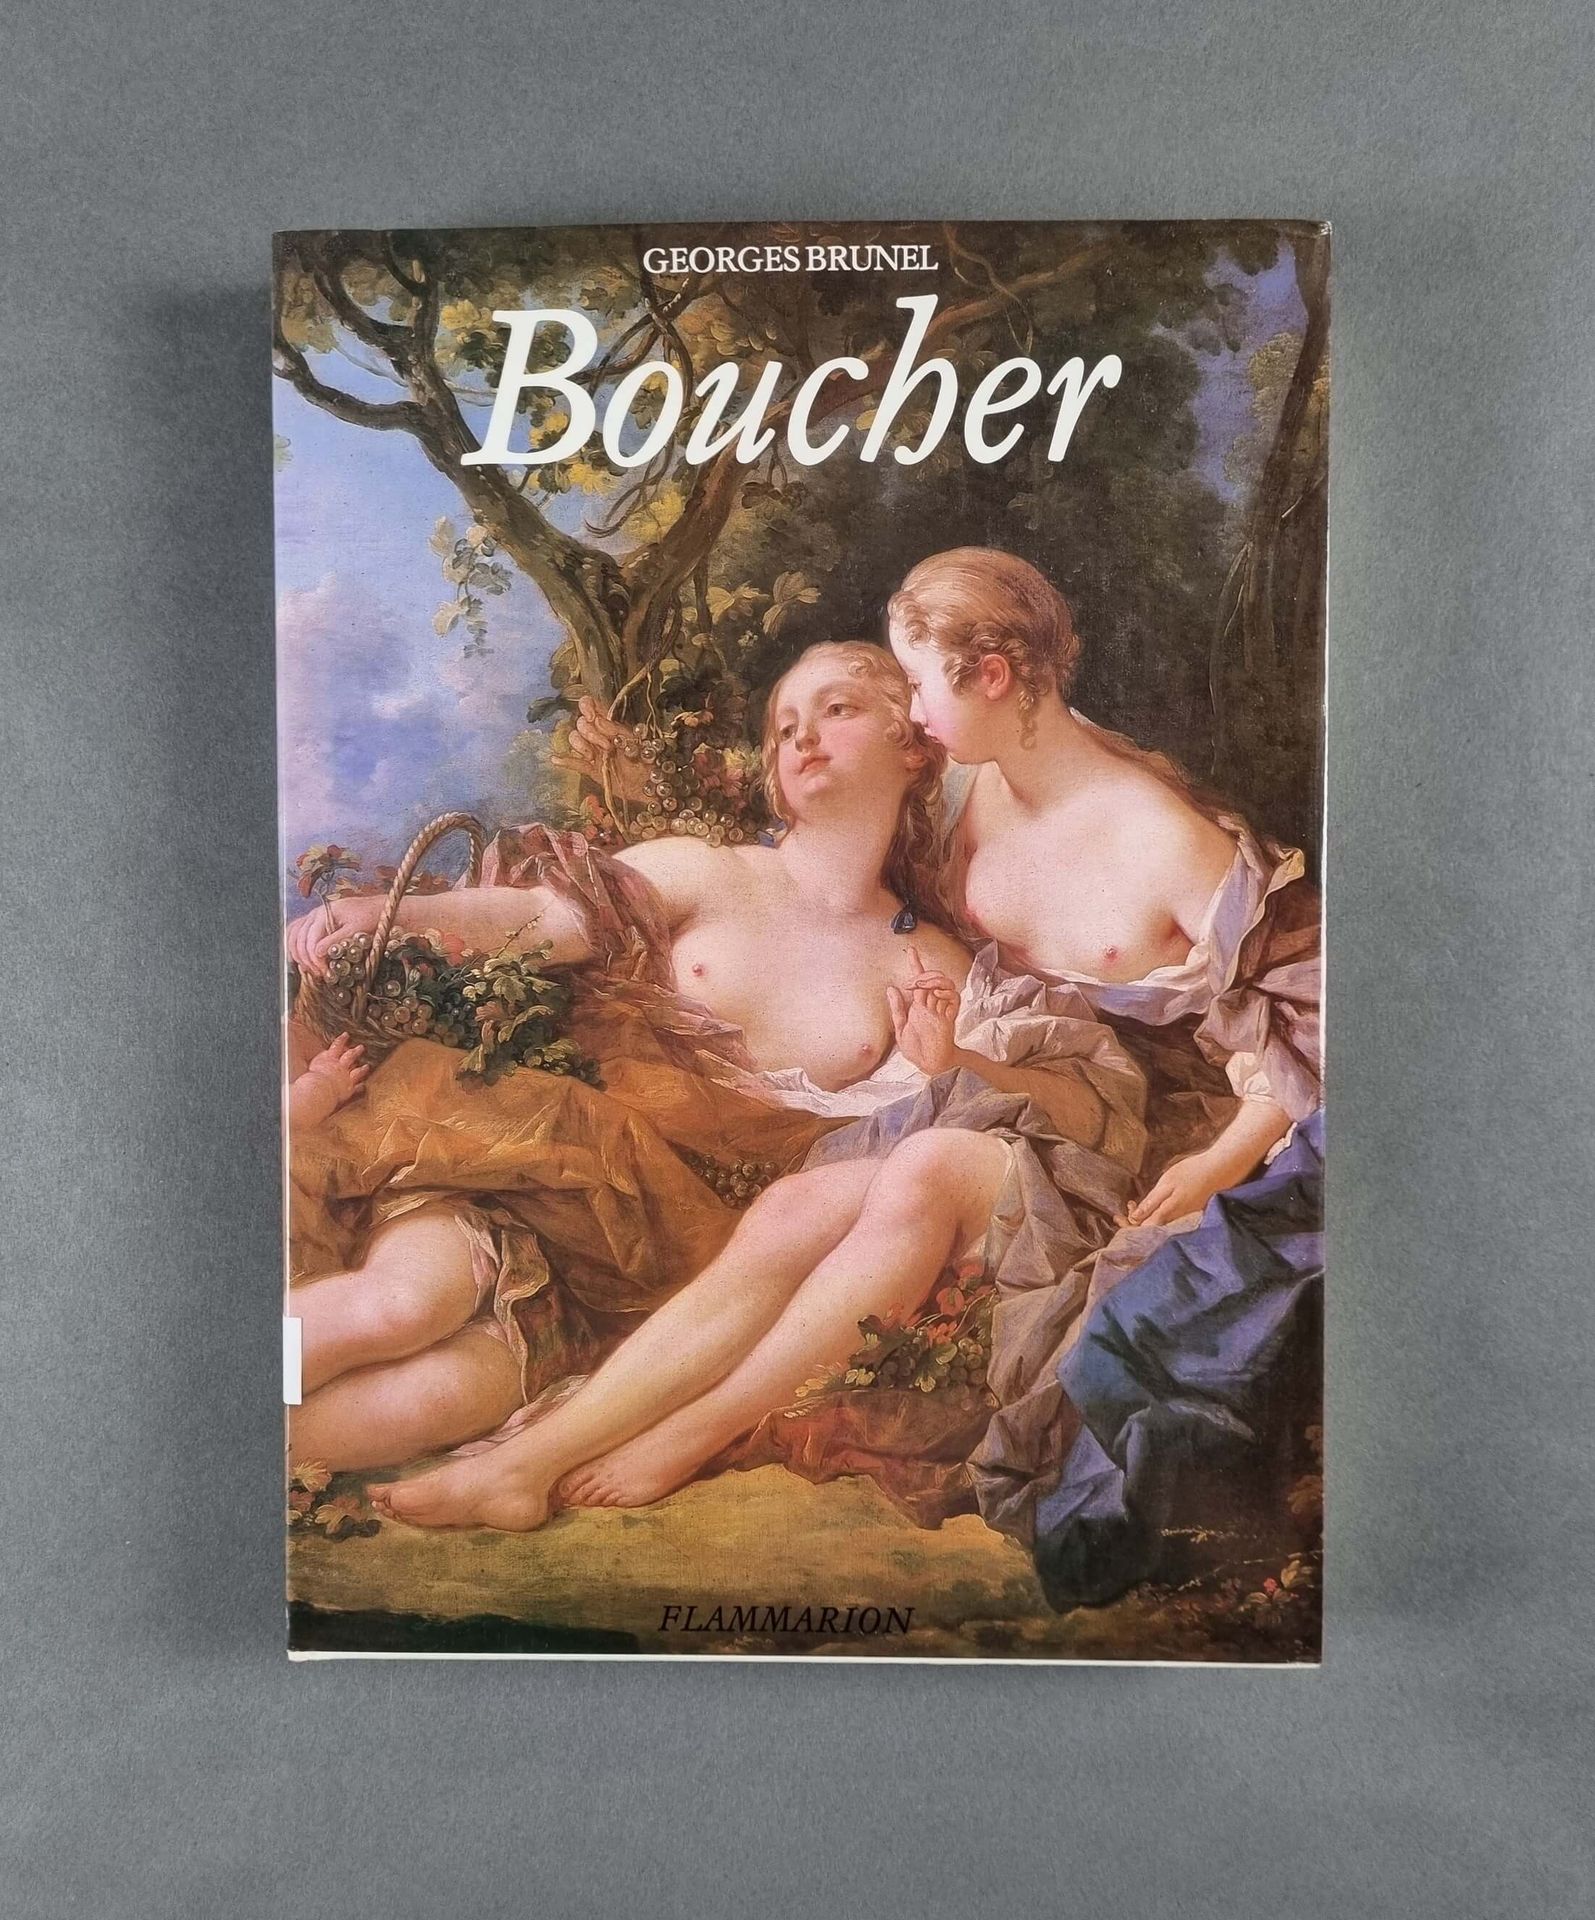 Null BRUNEL (Georges) : Boucher. Editions Flammarion, 1986.